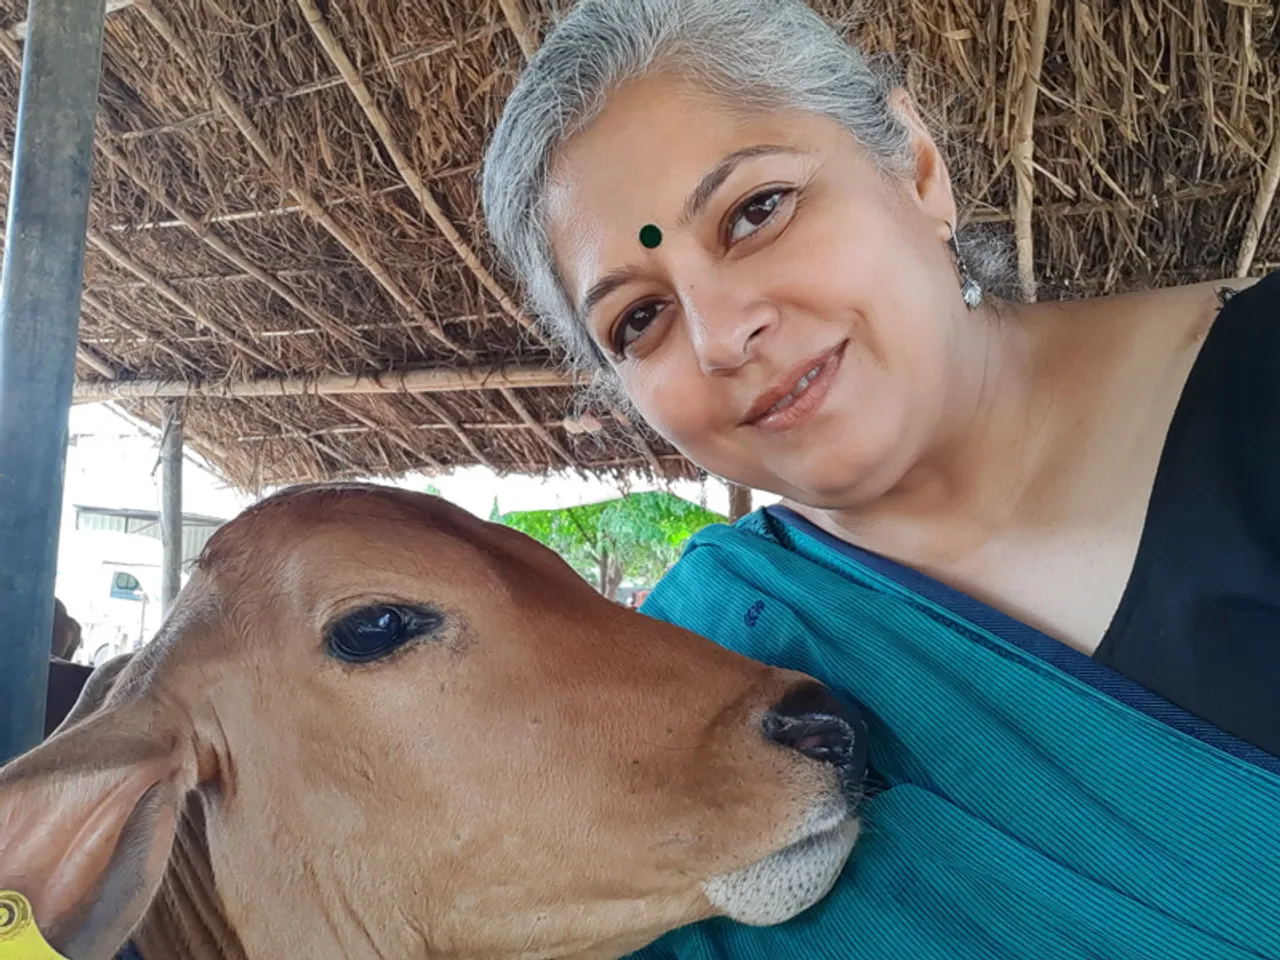 From German language teacher to millionaire dairy farmer, how Milan Sharma whipped up a success story